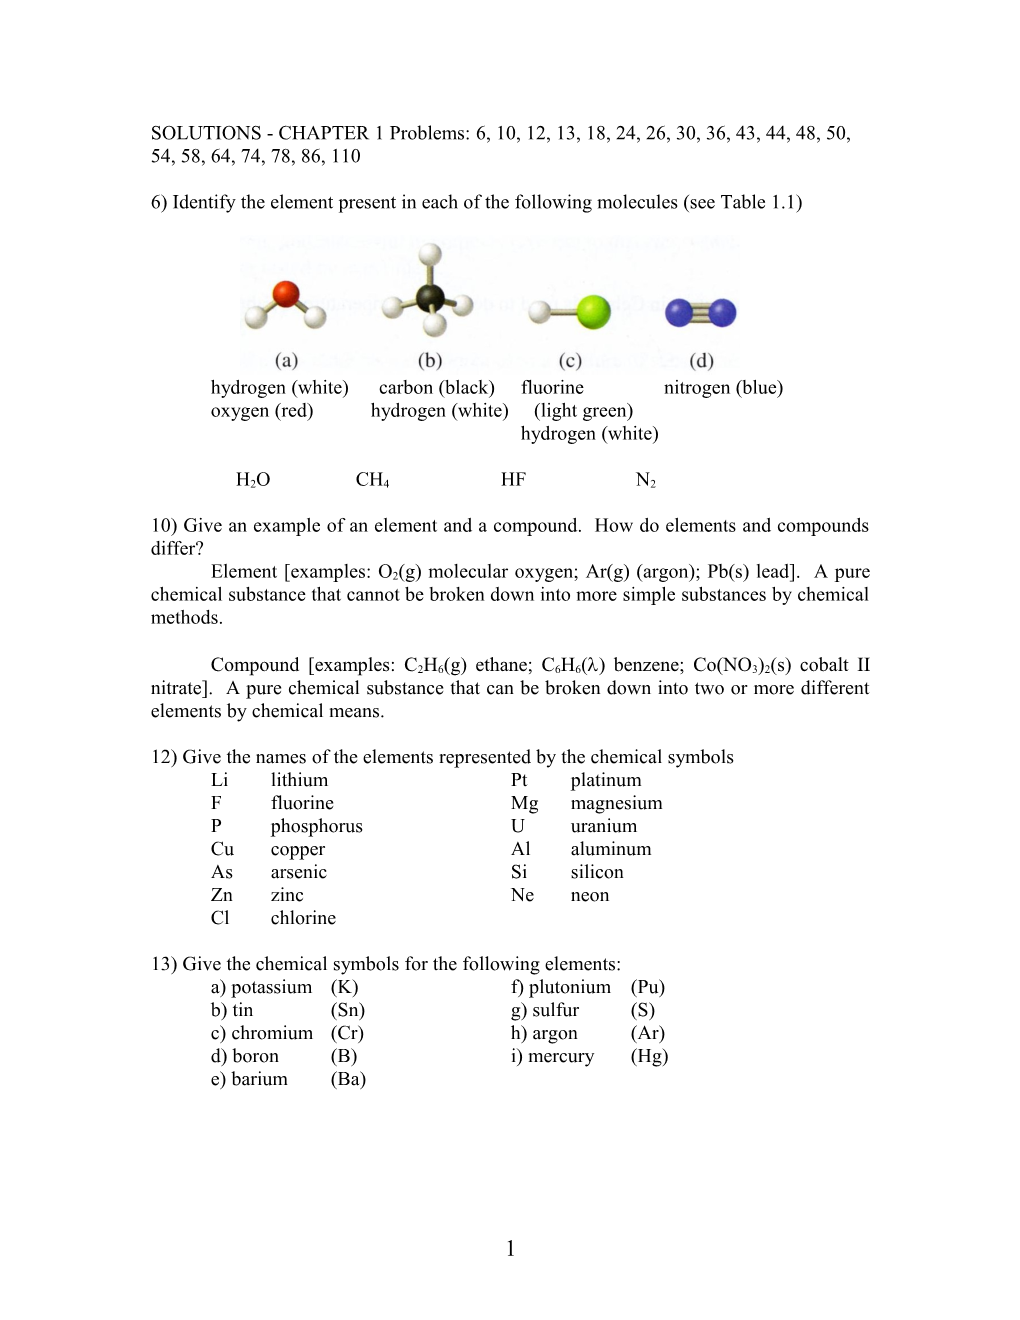 6) Identify the Element Present in Each of the Following Molecules (See Table 1.1)